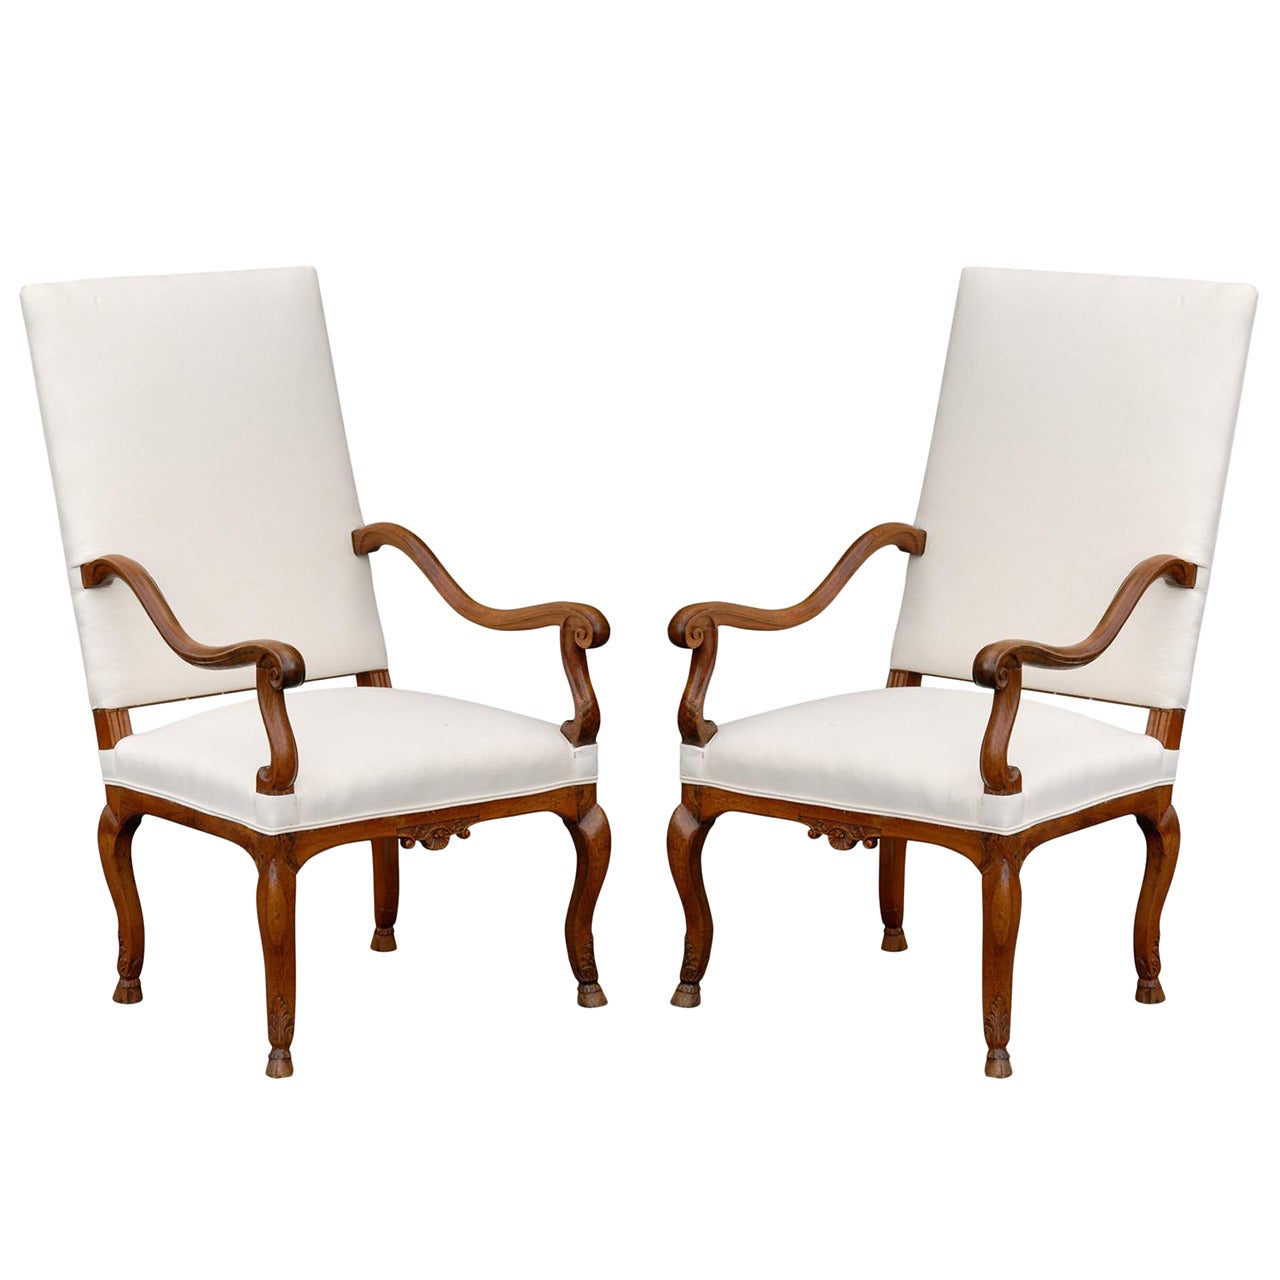 Pair of French Walnut Régence Style Upholstered Armchairs, circa 1820 For Sale